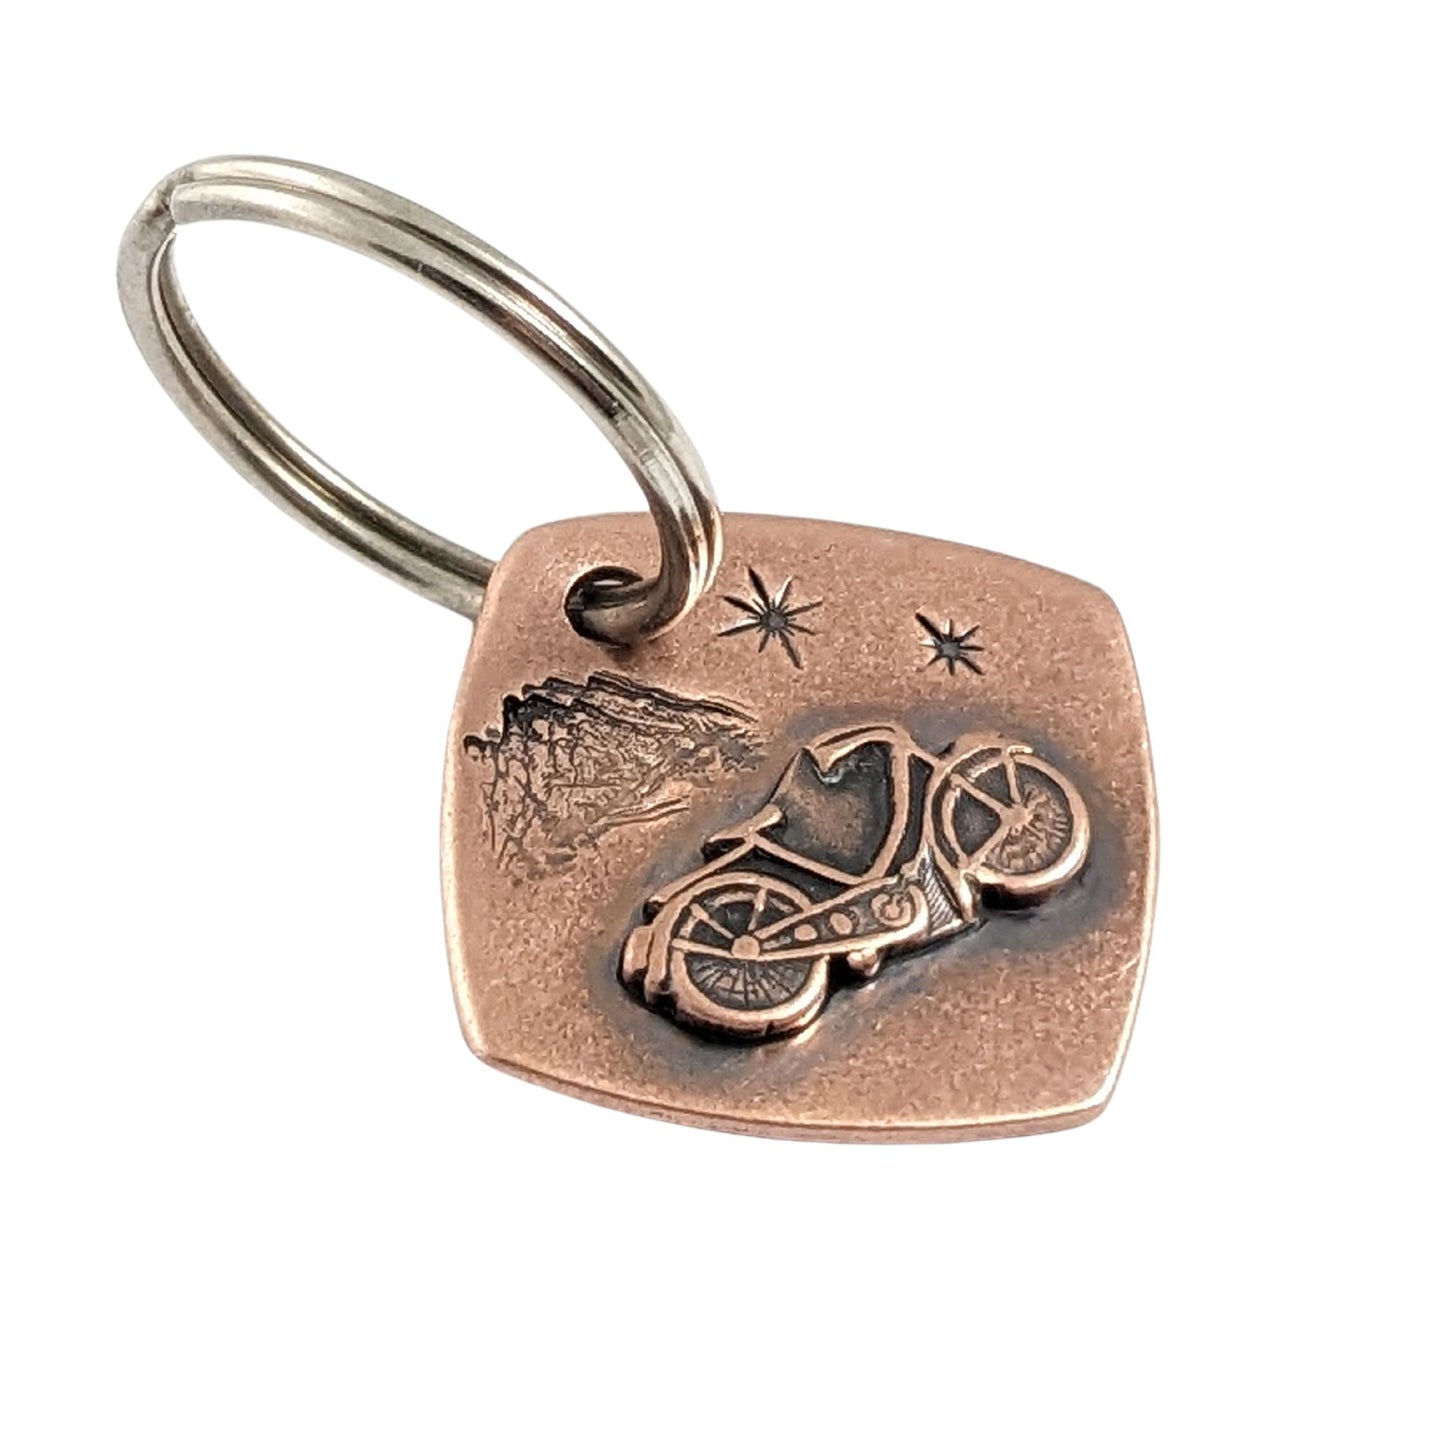 copper keychain with raised detailed bicycle. background is mountains and twinkling stars